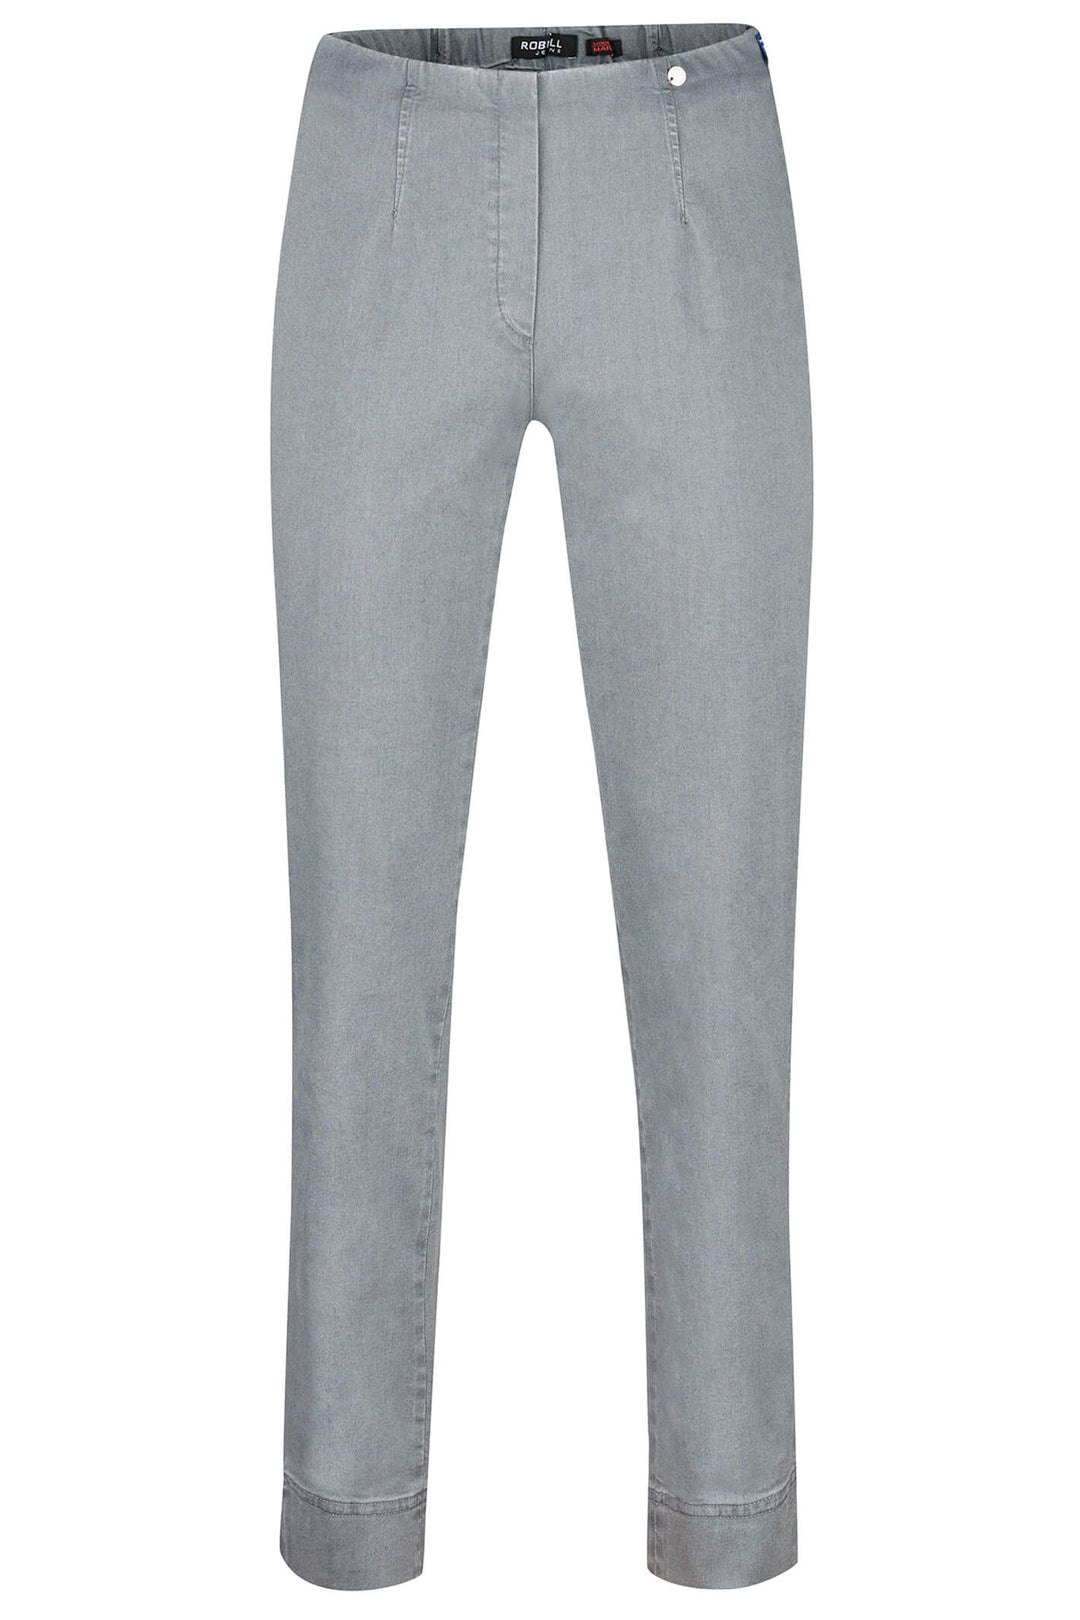 Robell Marie 51639-5448-95 78cm Grey Pull-On Trousers - Shirley Allum Boutique